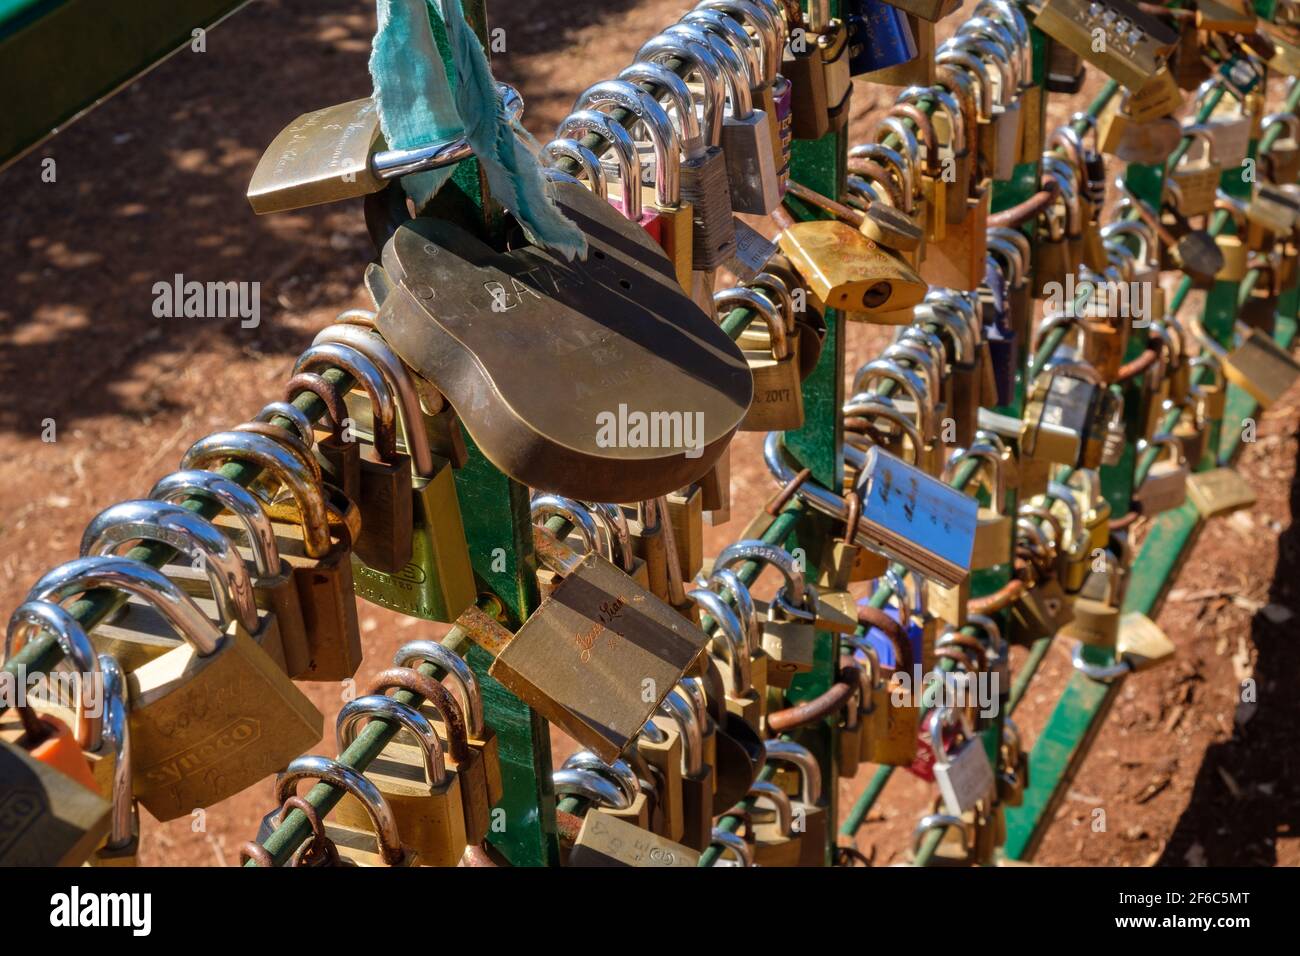 Padlocks to display couples love for each other Stock Photo